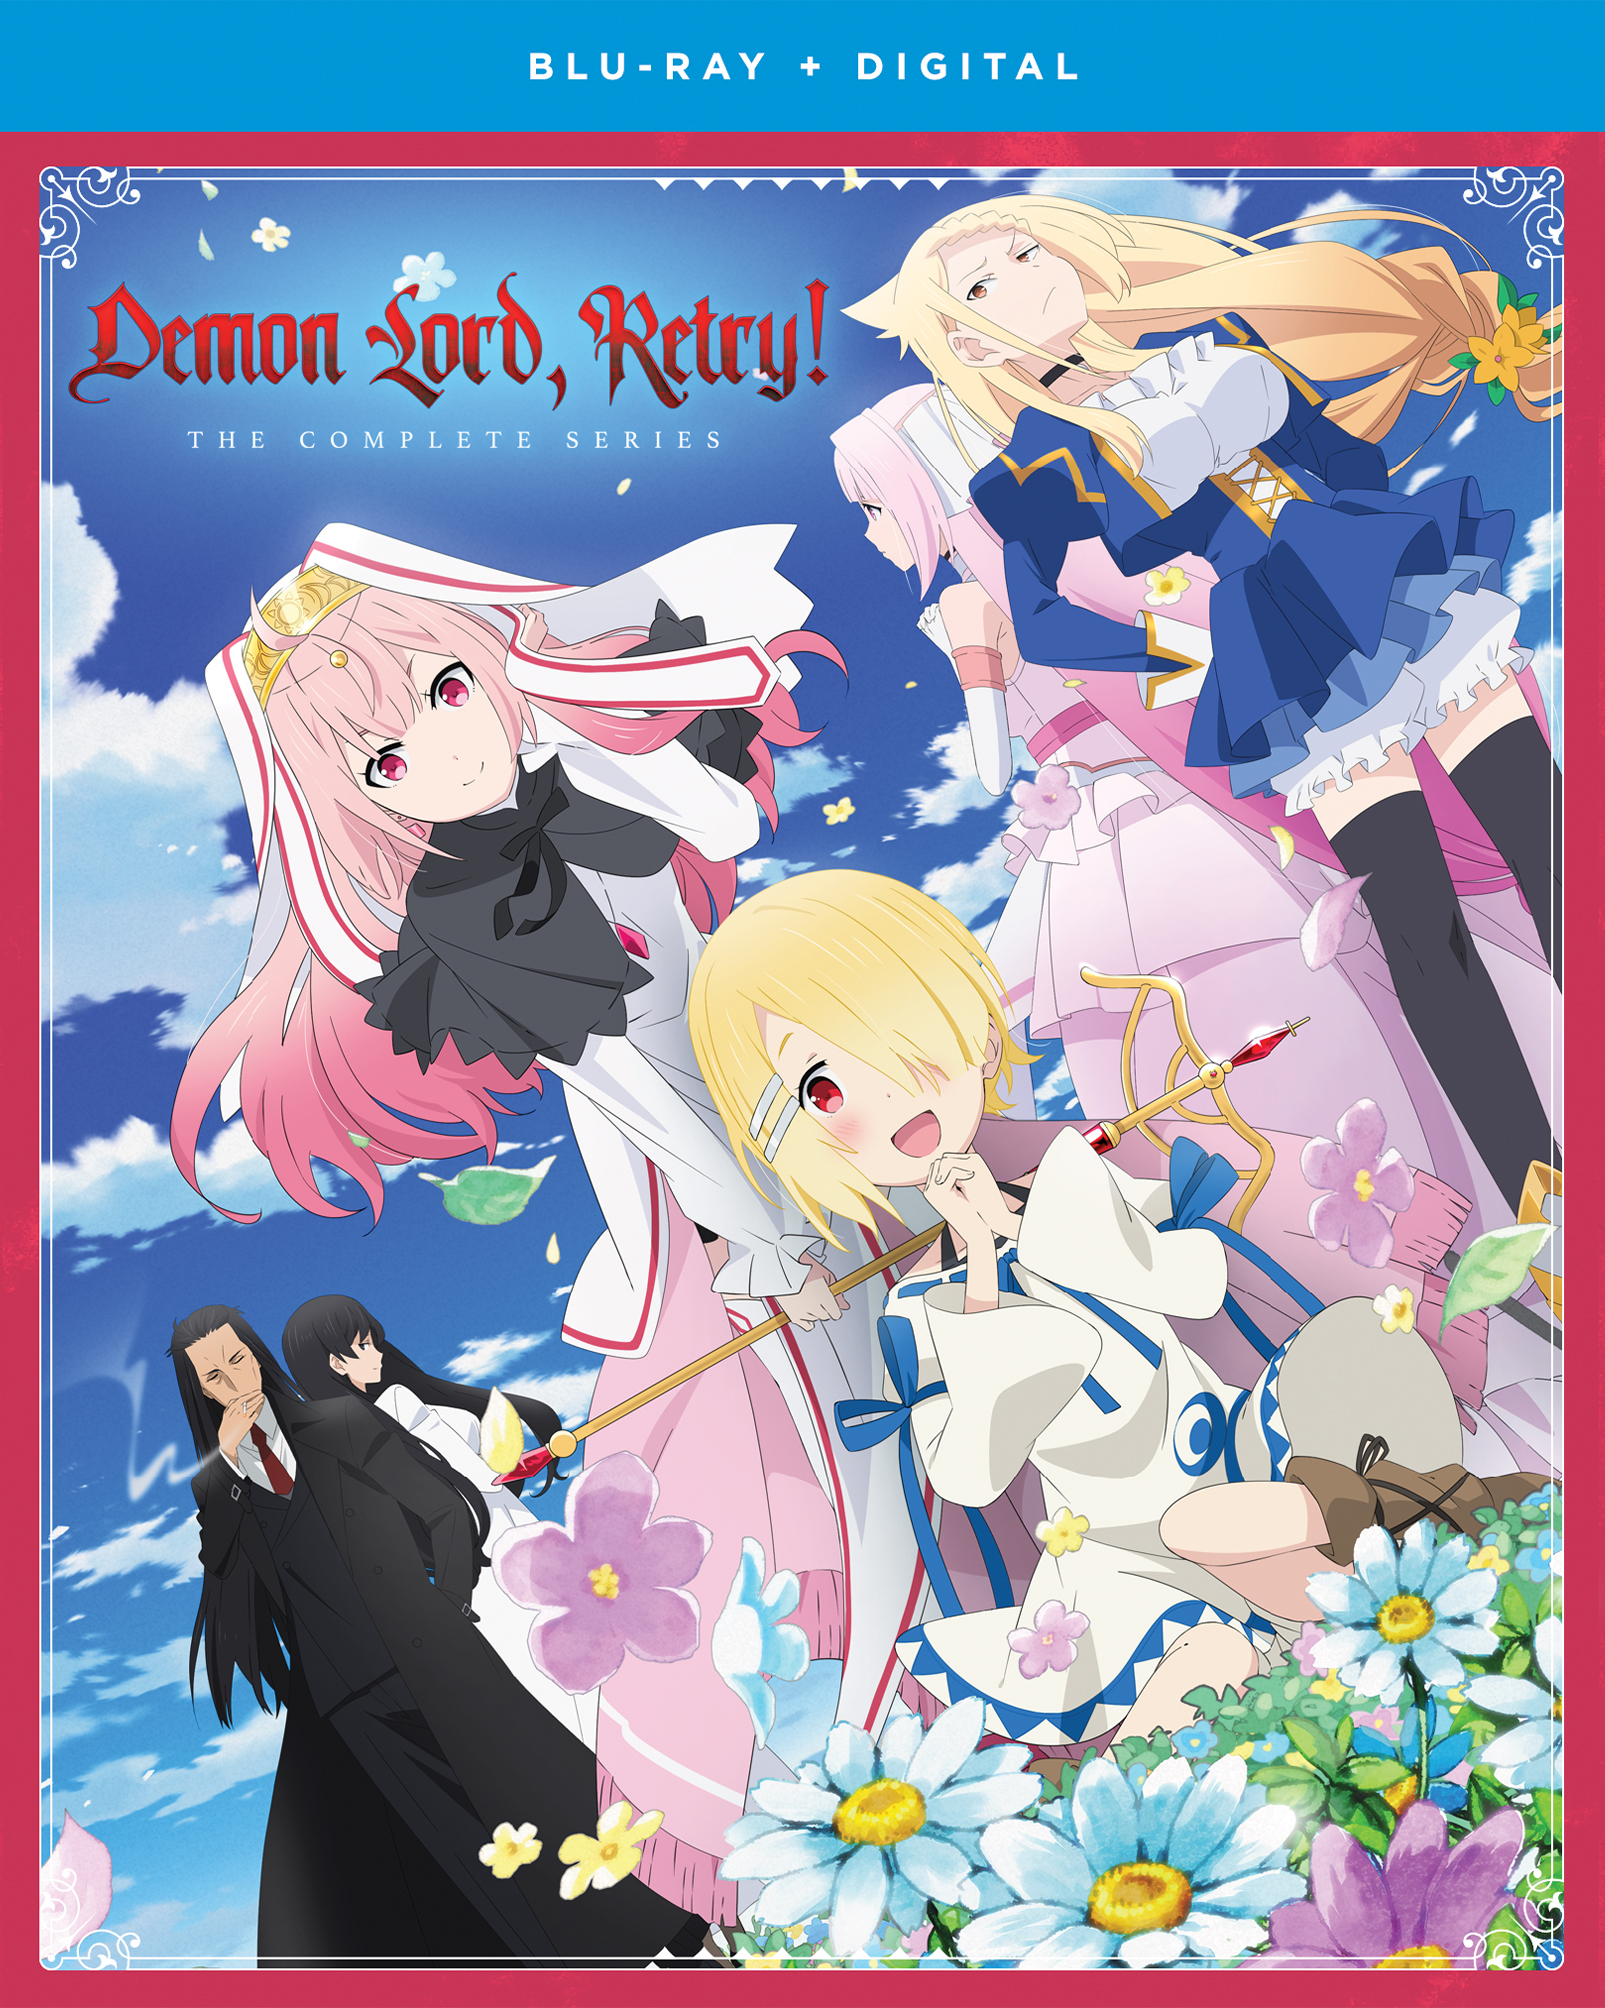 Is Demon Lord, Retry Any Good? - Anime Shelter